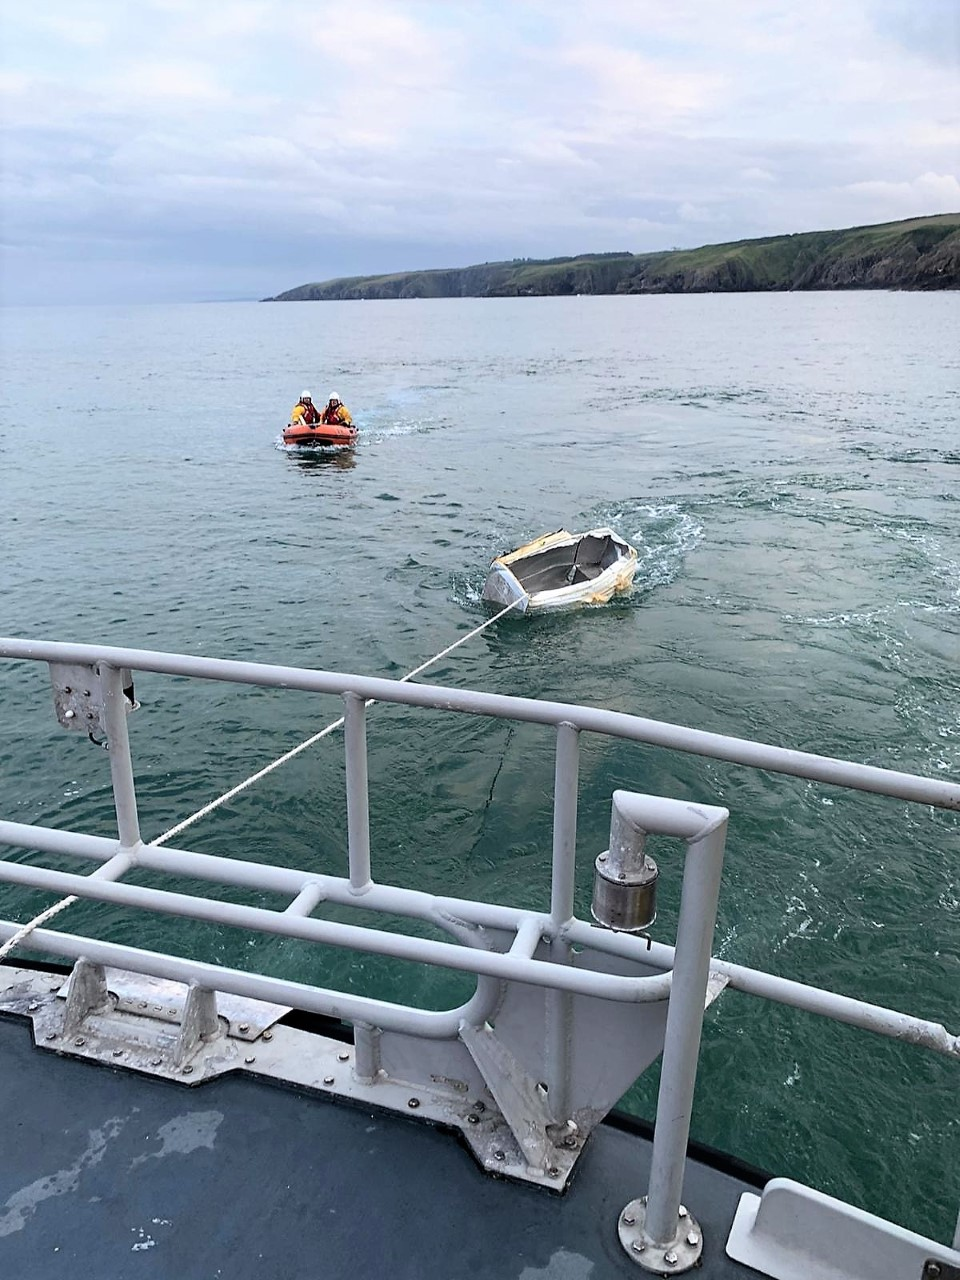 The Aberdeen lifeboat had to tow the fridges back to land